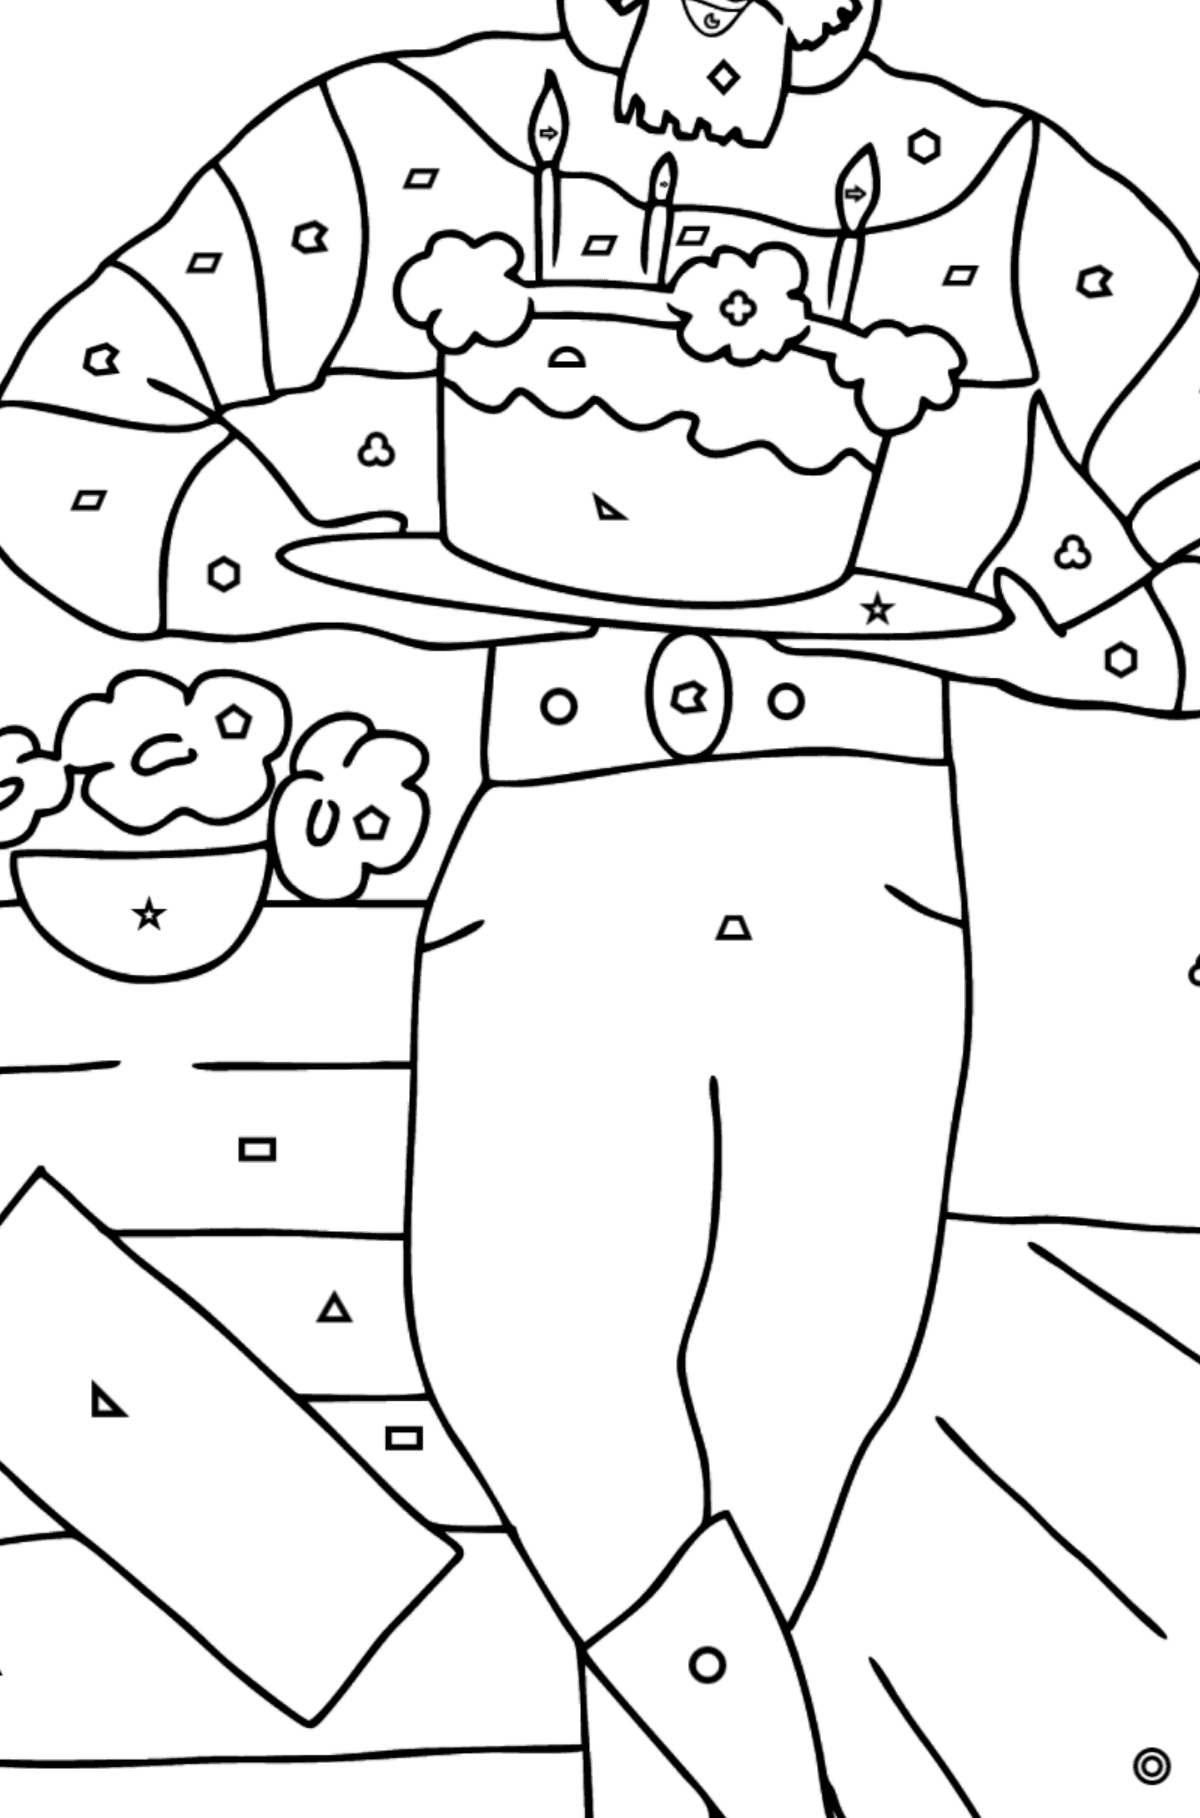 Coloring Page - A Pirate with Cake - Coloring by Geometric Shapes for Kids